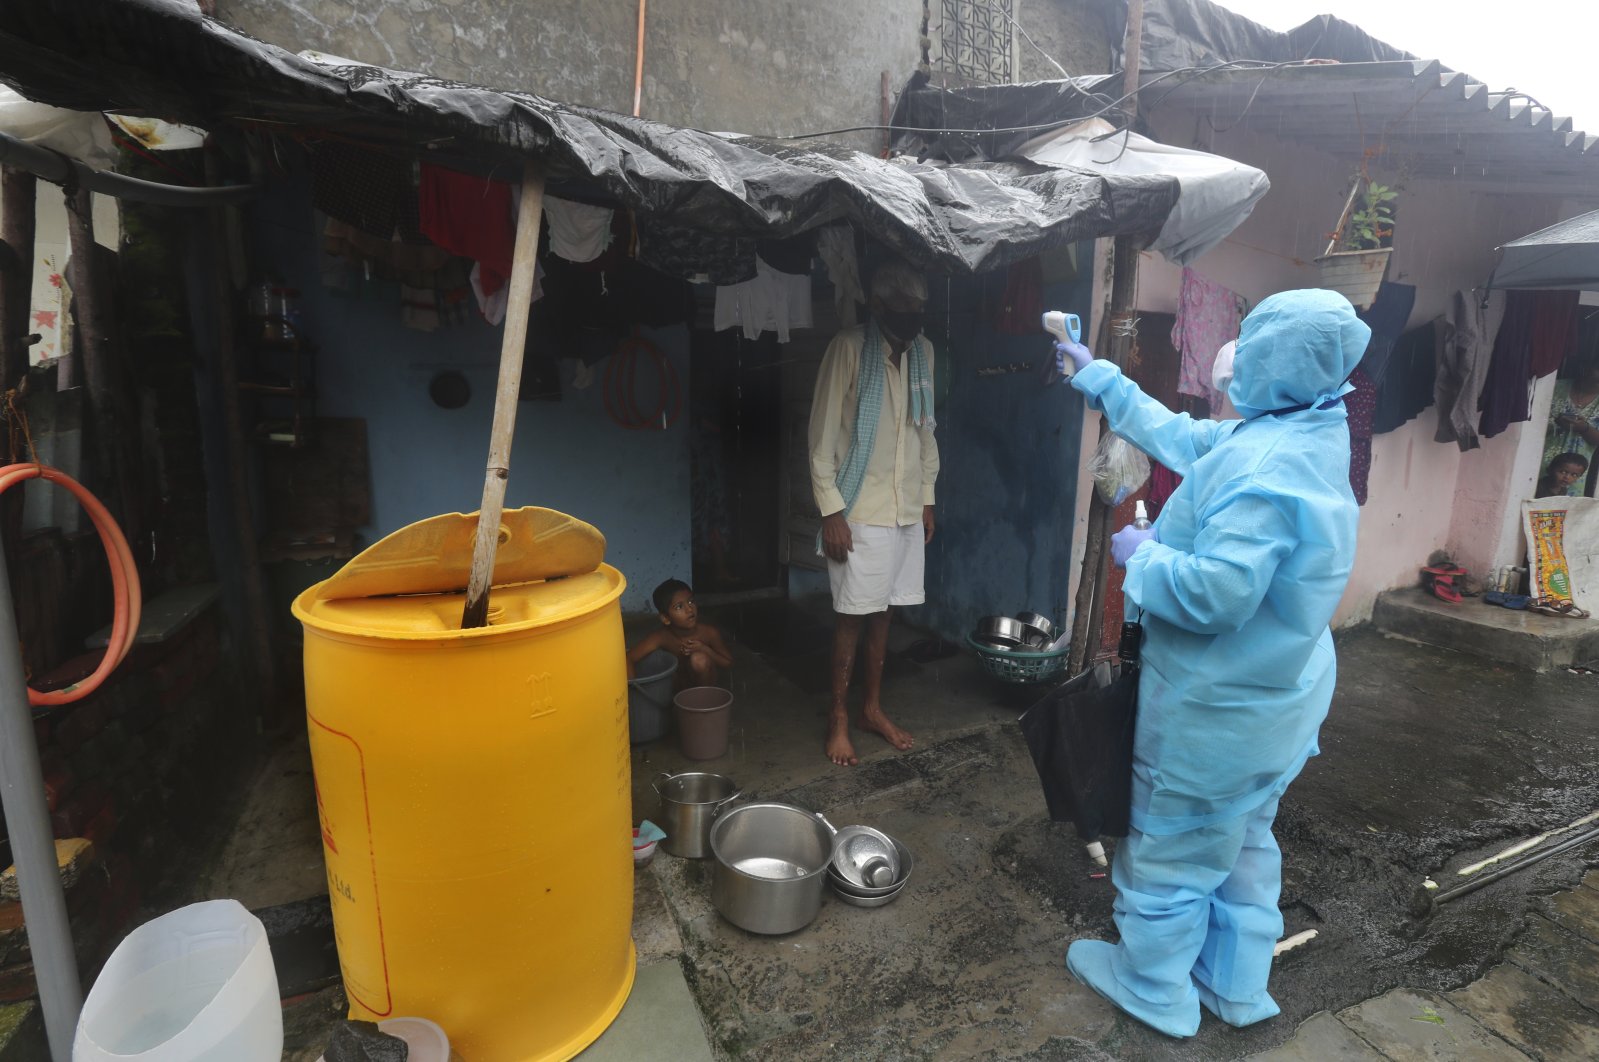 A health worker screens people for COVID-19 symptoms at a slum in Mumbai, India, July 14, 2020. (AP Photo)